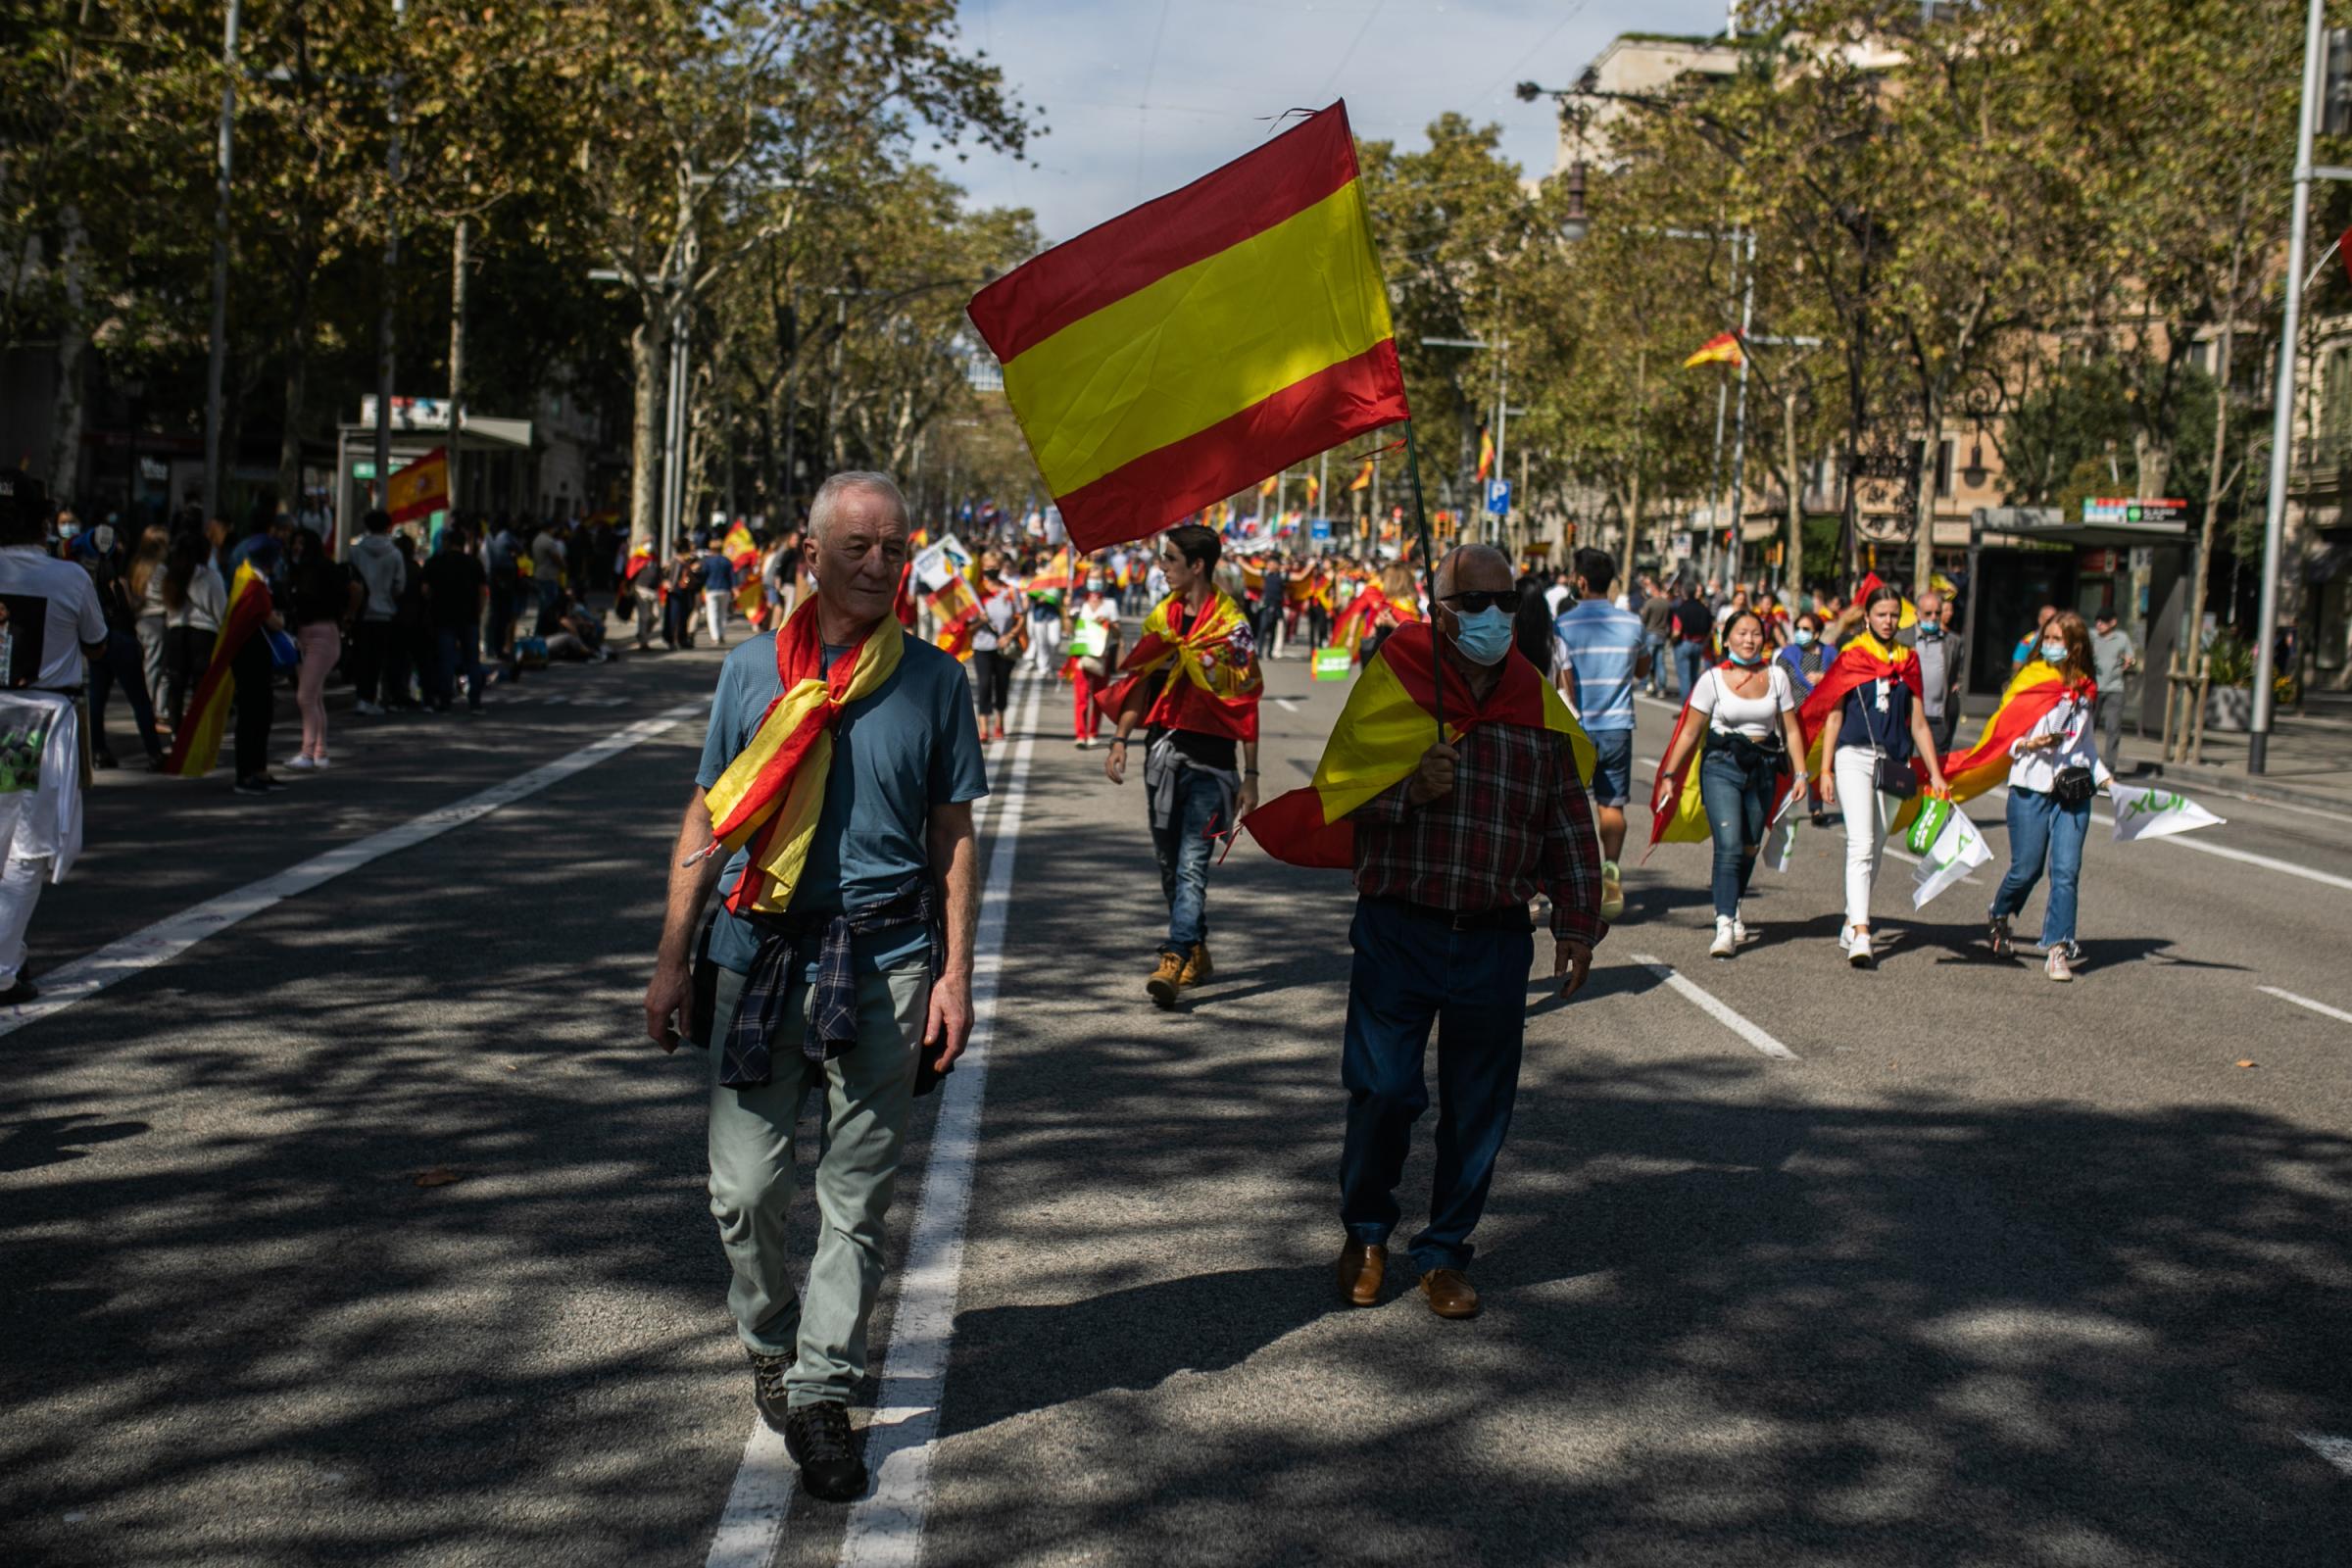 Spain's National Day Overshadowed By Colonialist Past  - BARCELONA, SPAIN - OCTOBER 12: People at the main...